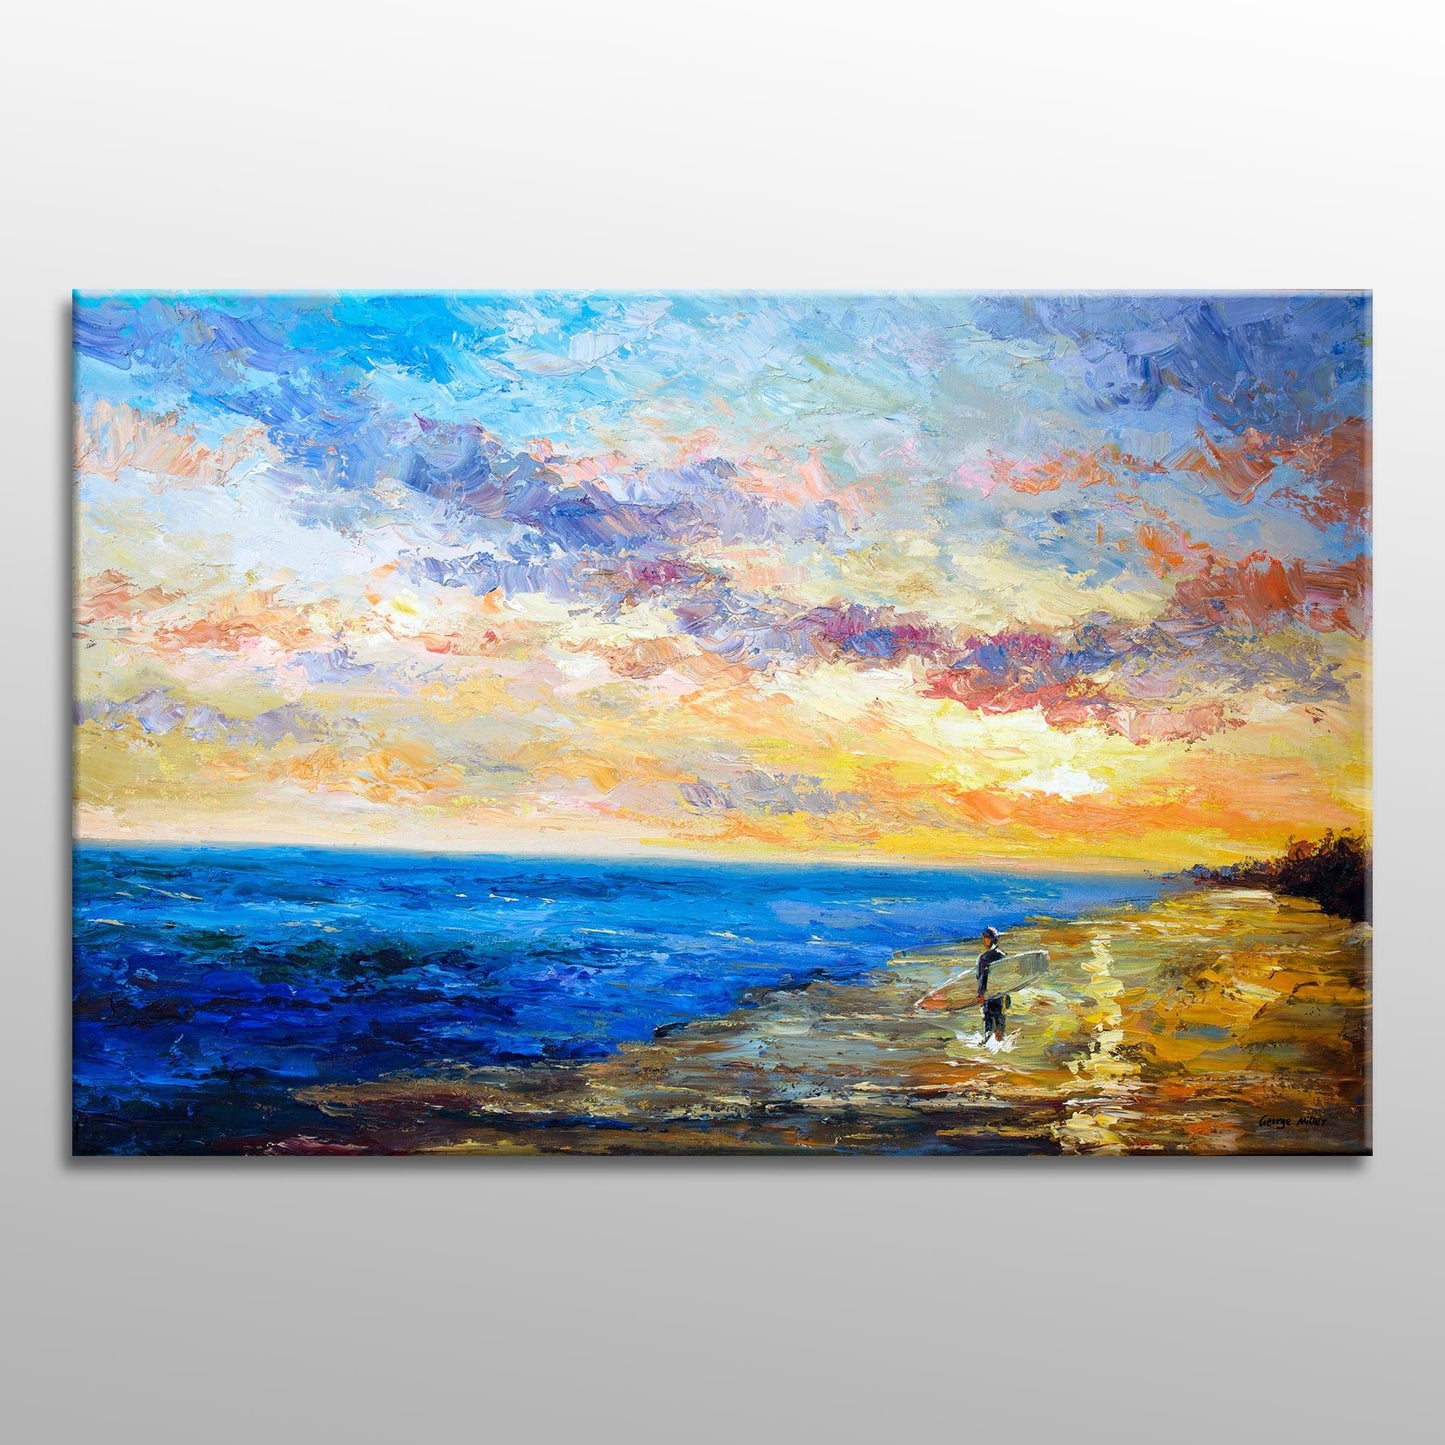 Large Oil Painting, Contemporary Painting, Wall Decor, Large Abstract Painting, Canvas Art, Painting Abstract, Seascape Oil Painting Sunrise